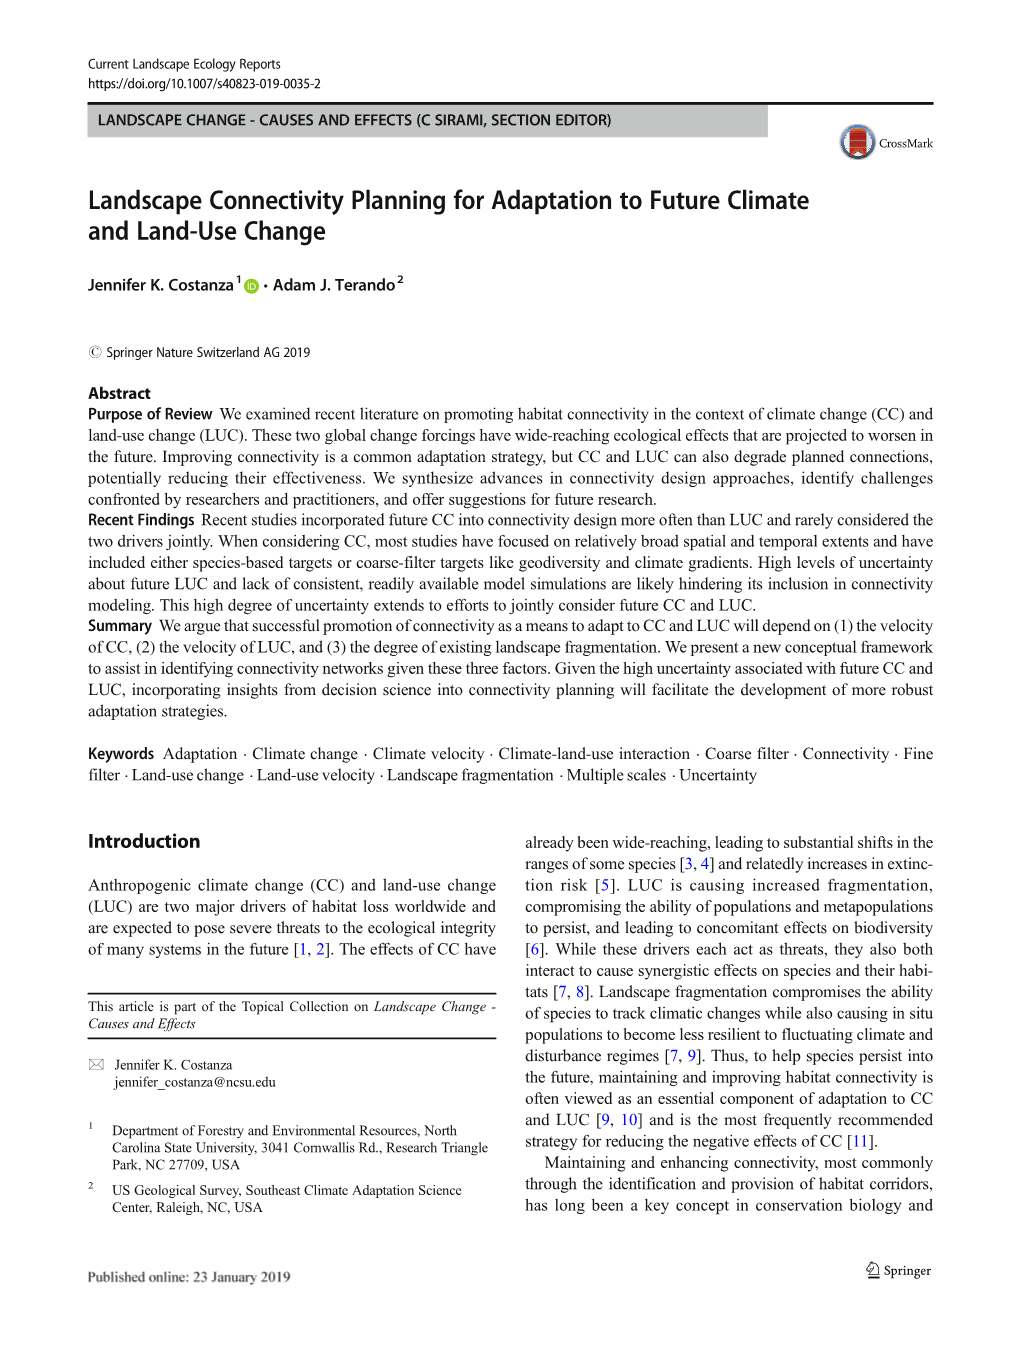 Landscape Connectivity Planning for Adaptation to Future Climate and Land-Use Change